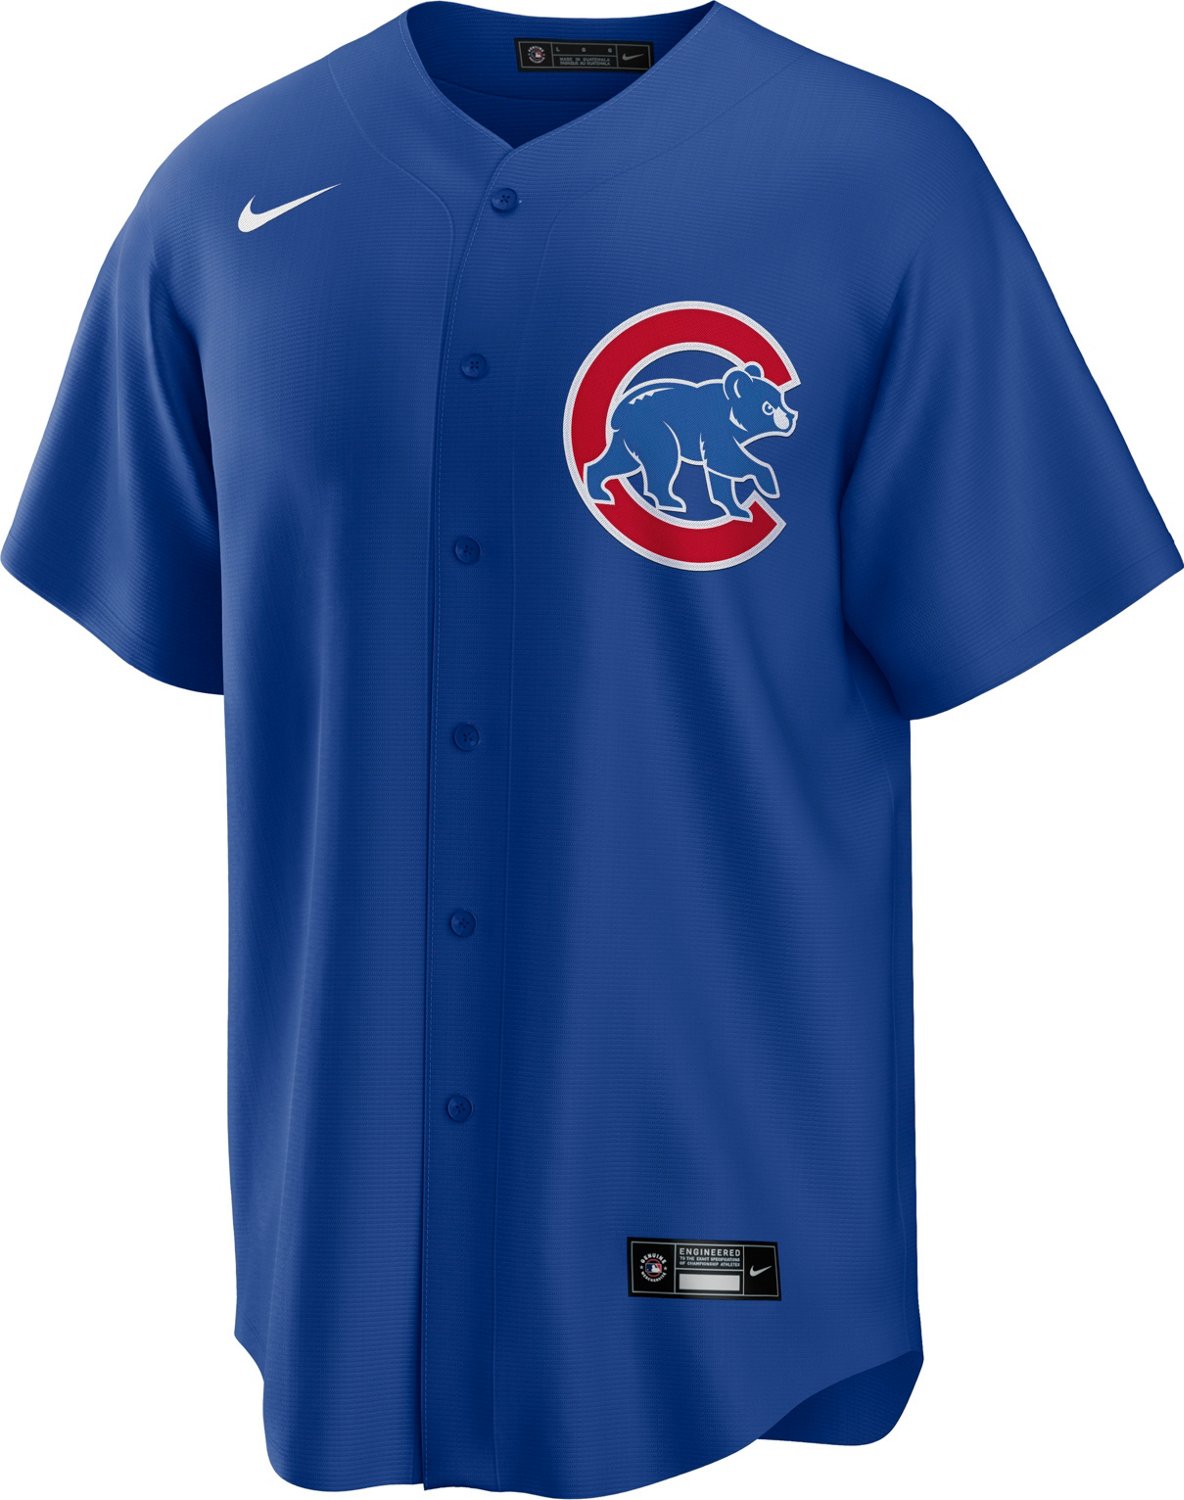 Nike Men's Chicago Cubs Official Replica Jersey